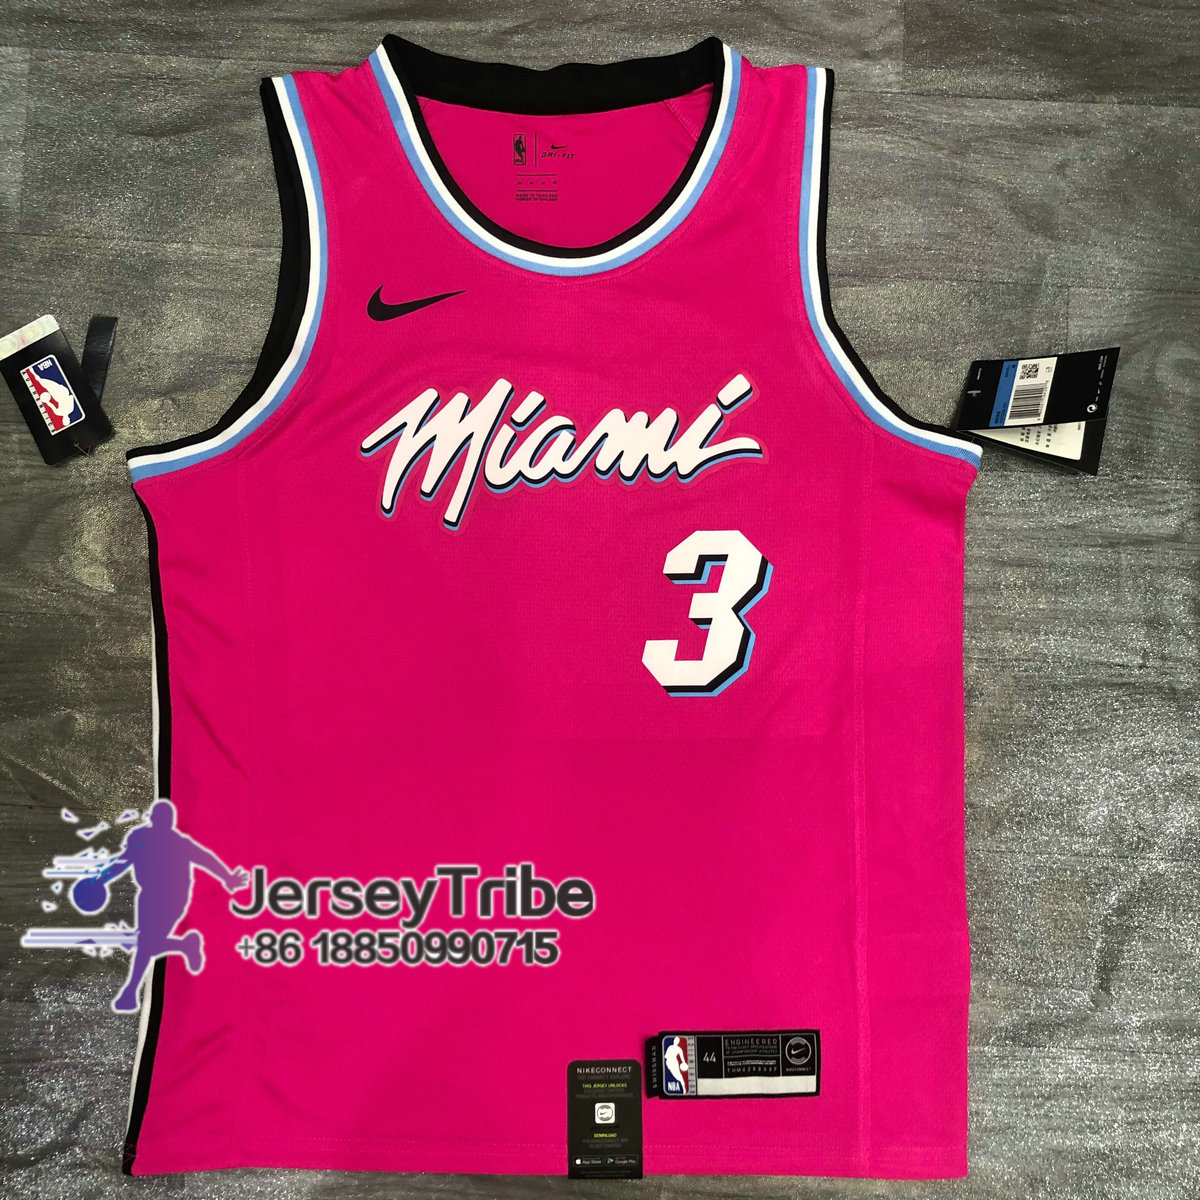 Miami 22# Jimmy Fans Version Uniform，Mens and Womens Embroidery Jerseys，Number and Name on The Back Fan Black-S-44 CNMD 2020 Regular Season Basketball Jersey 